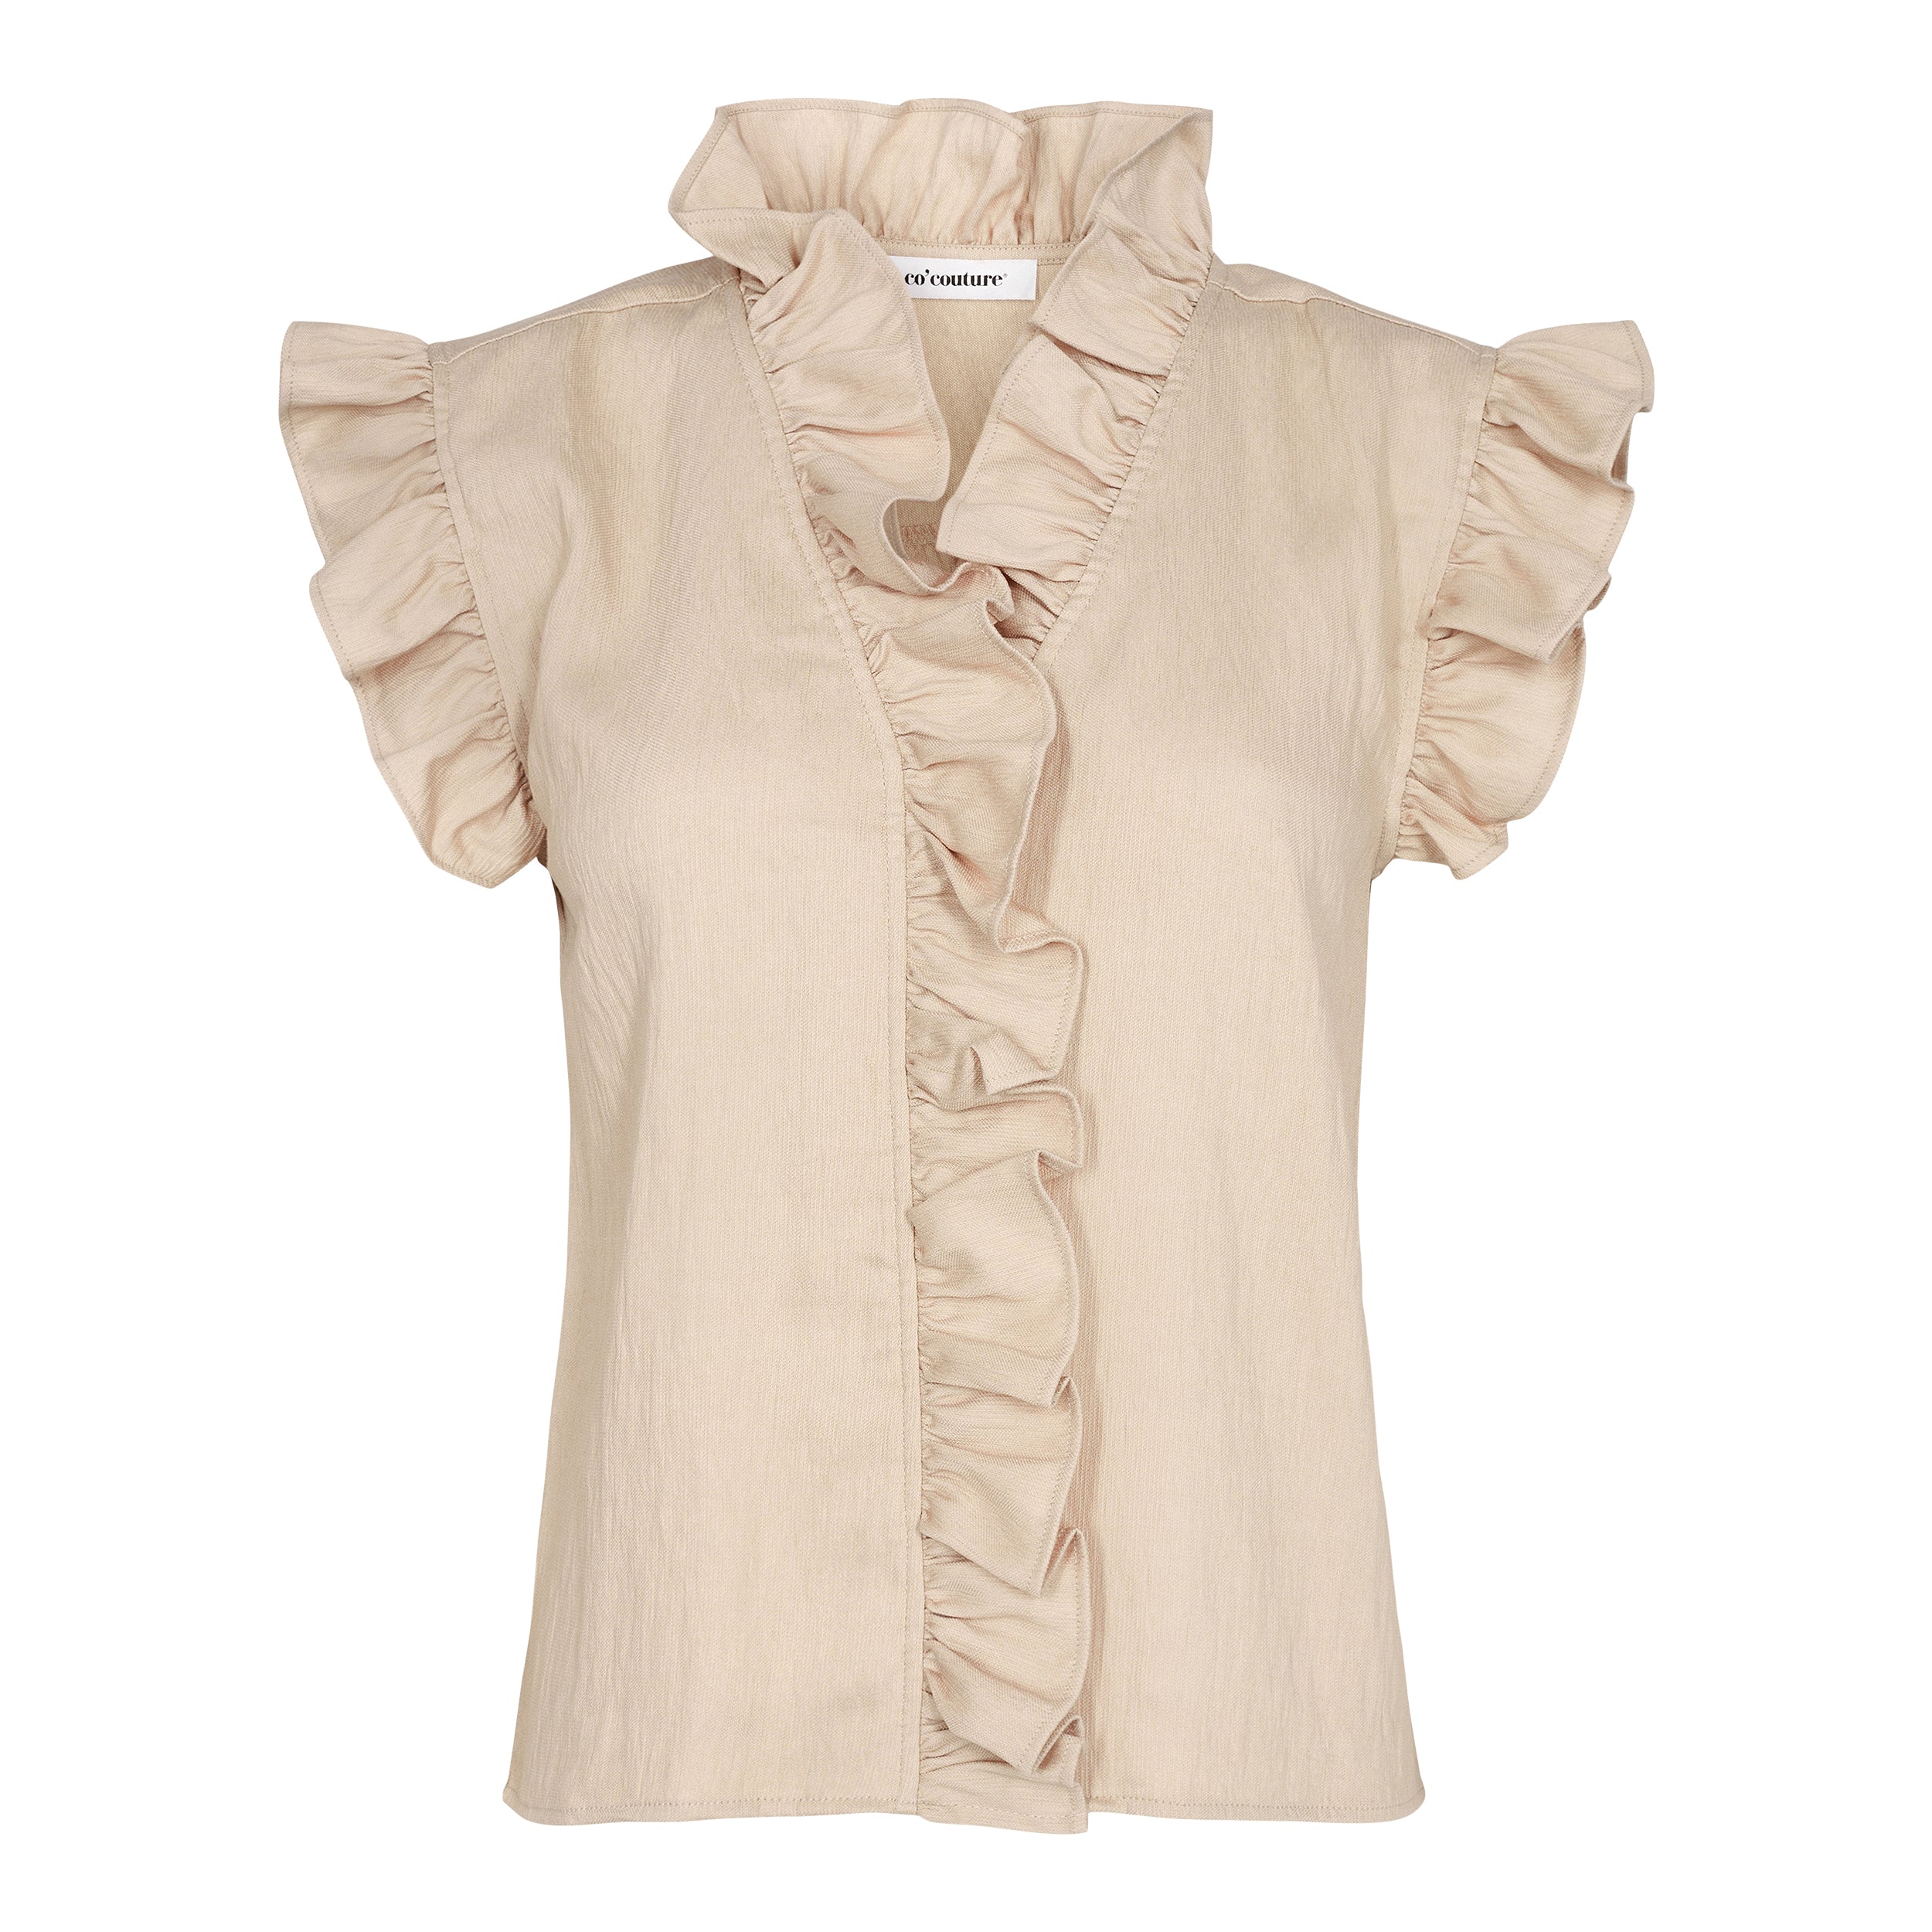 Co'couture Sueda Frill top, Sand